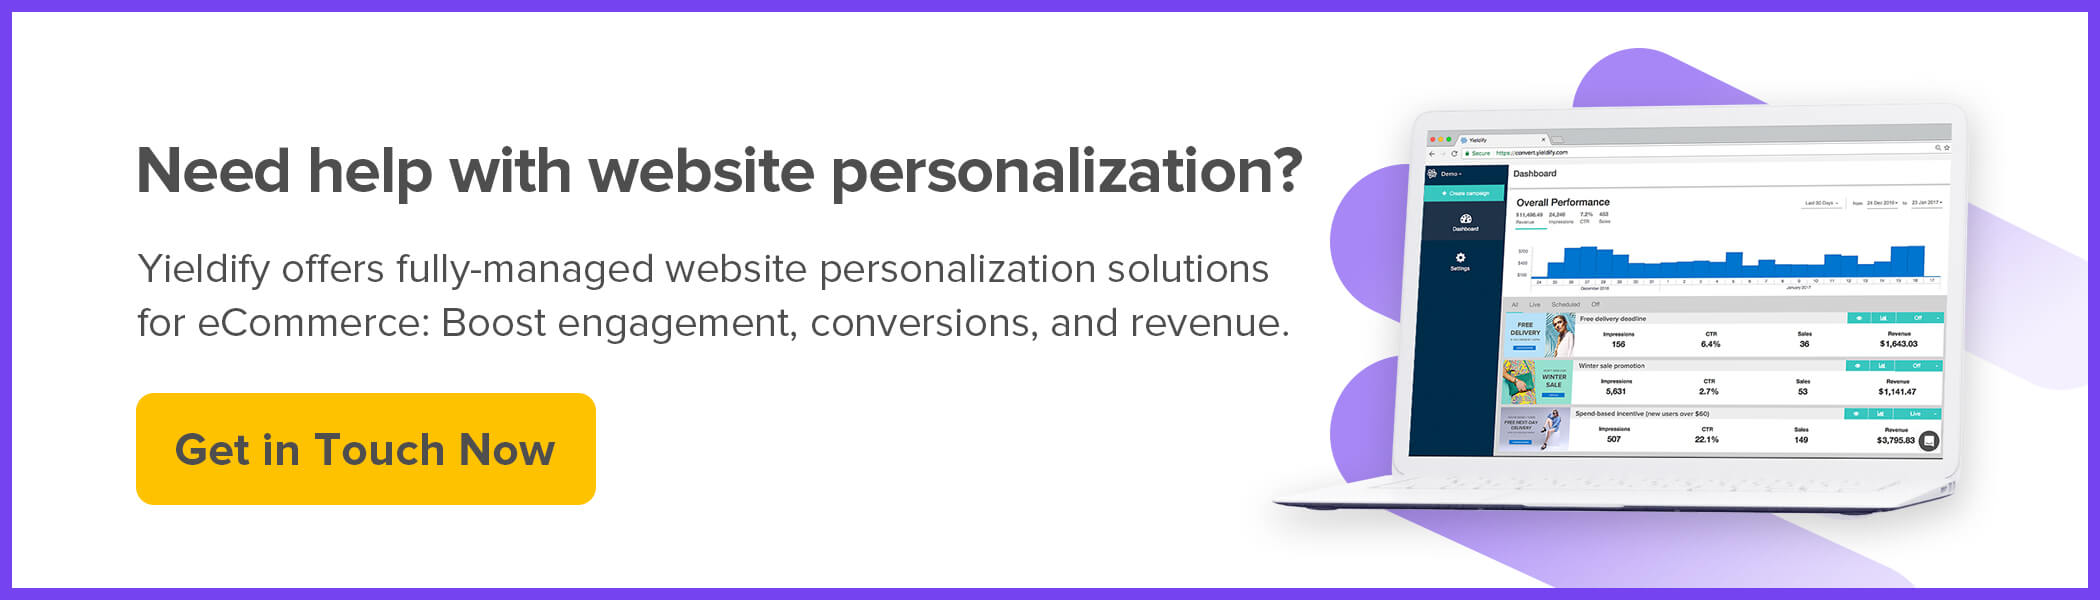 Website personalization solution - Book a Yieldify demo now!